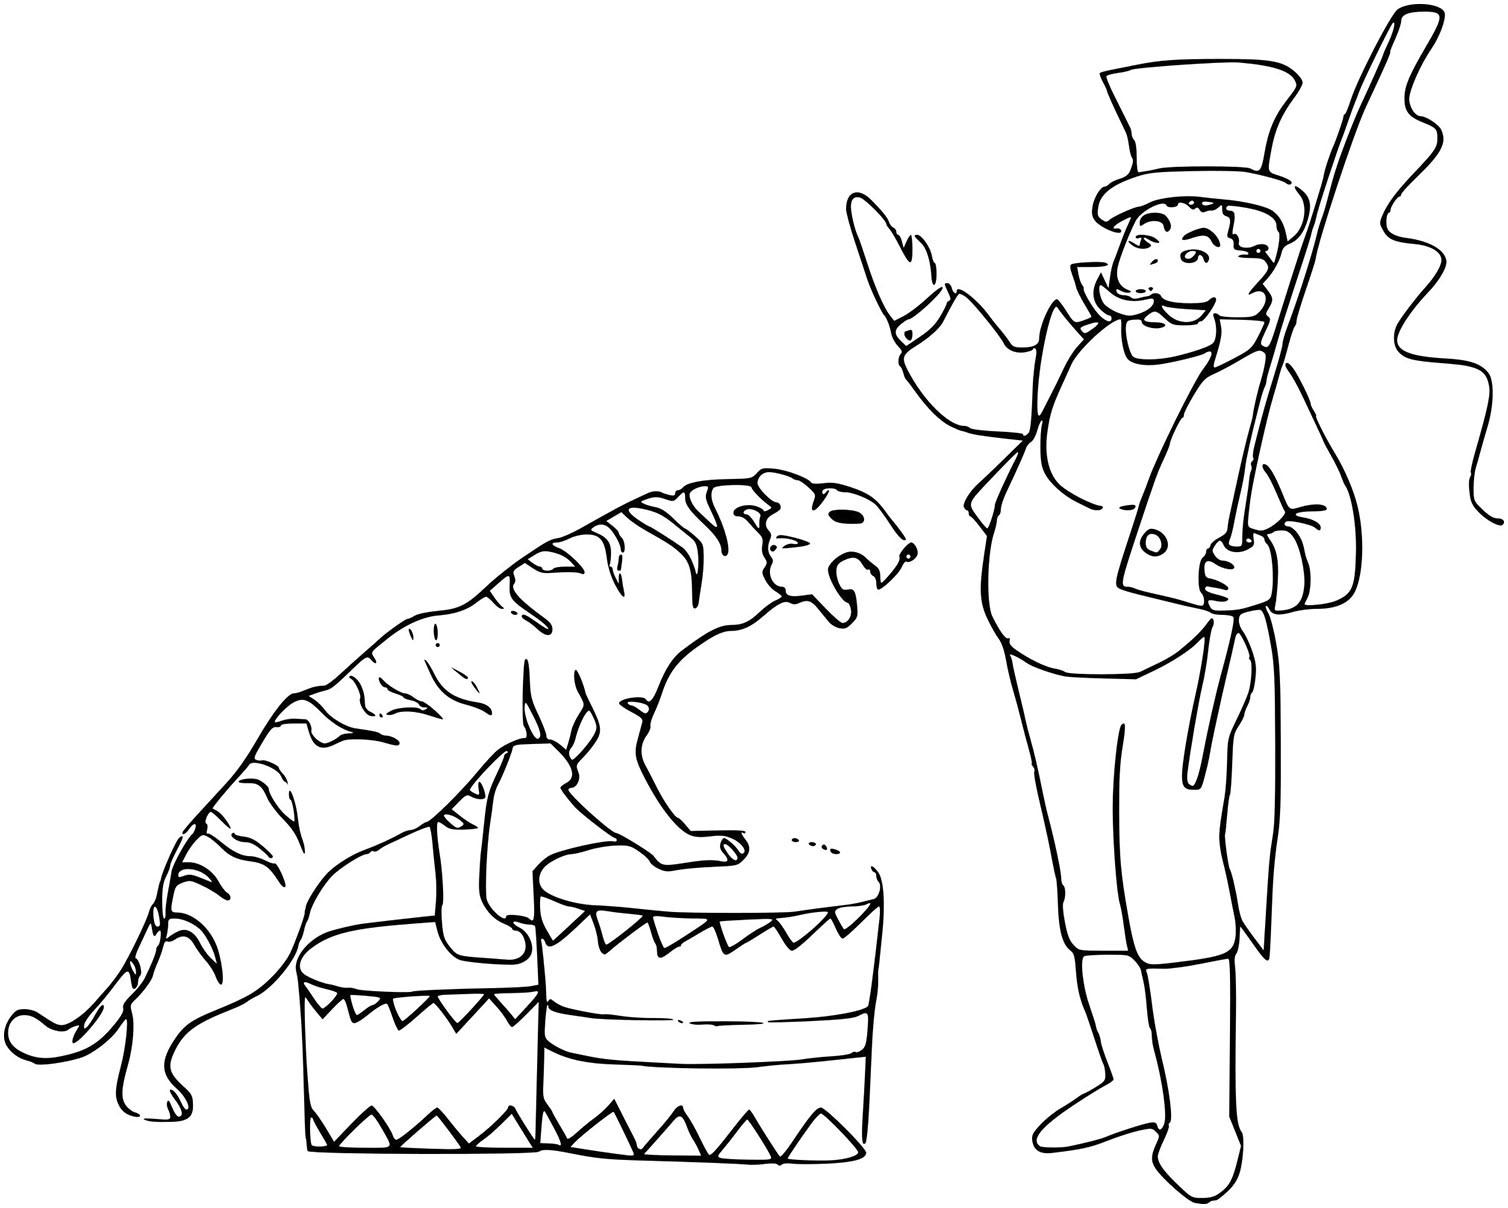 Simple Circus coloring page for children